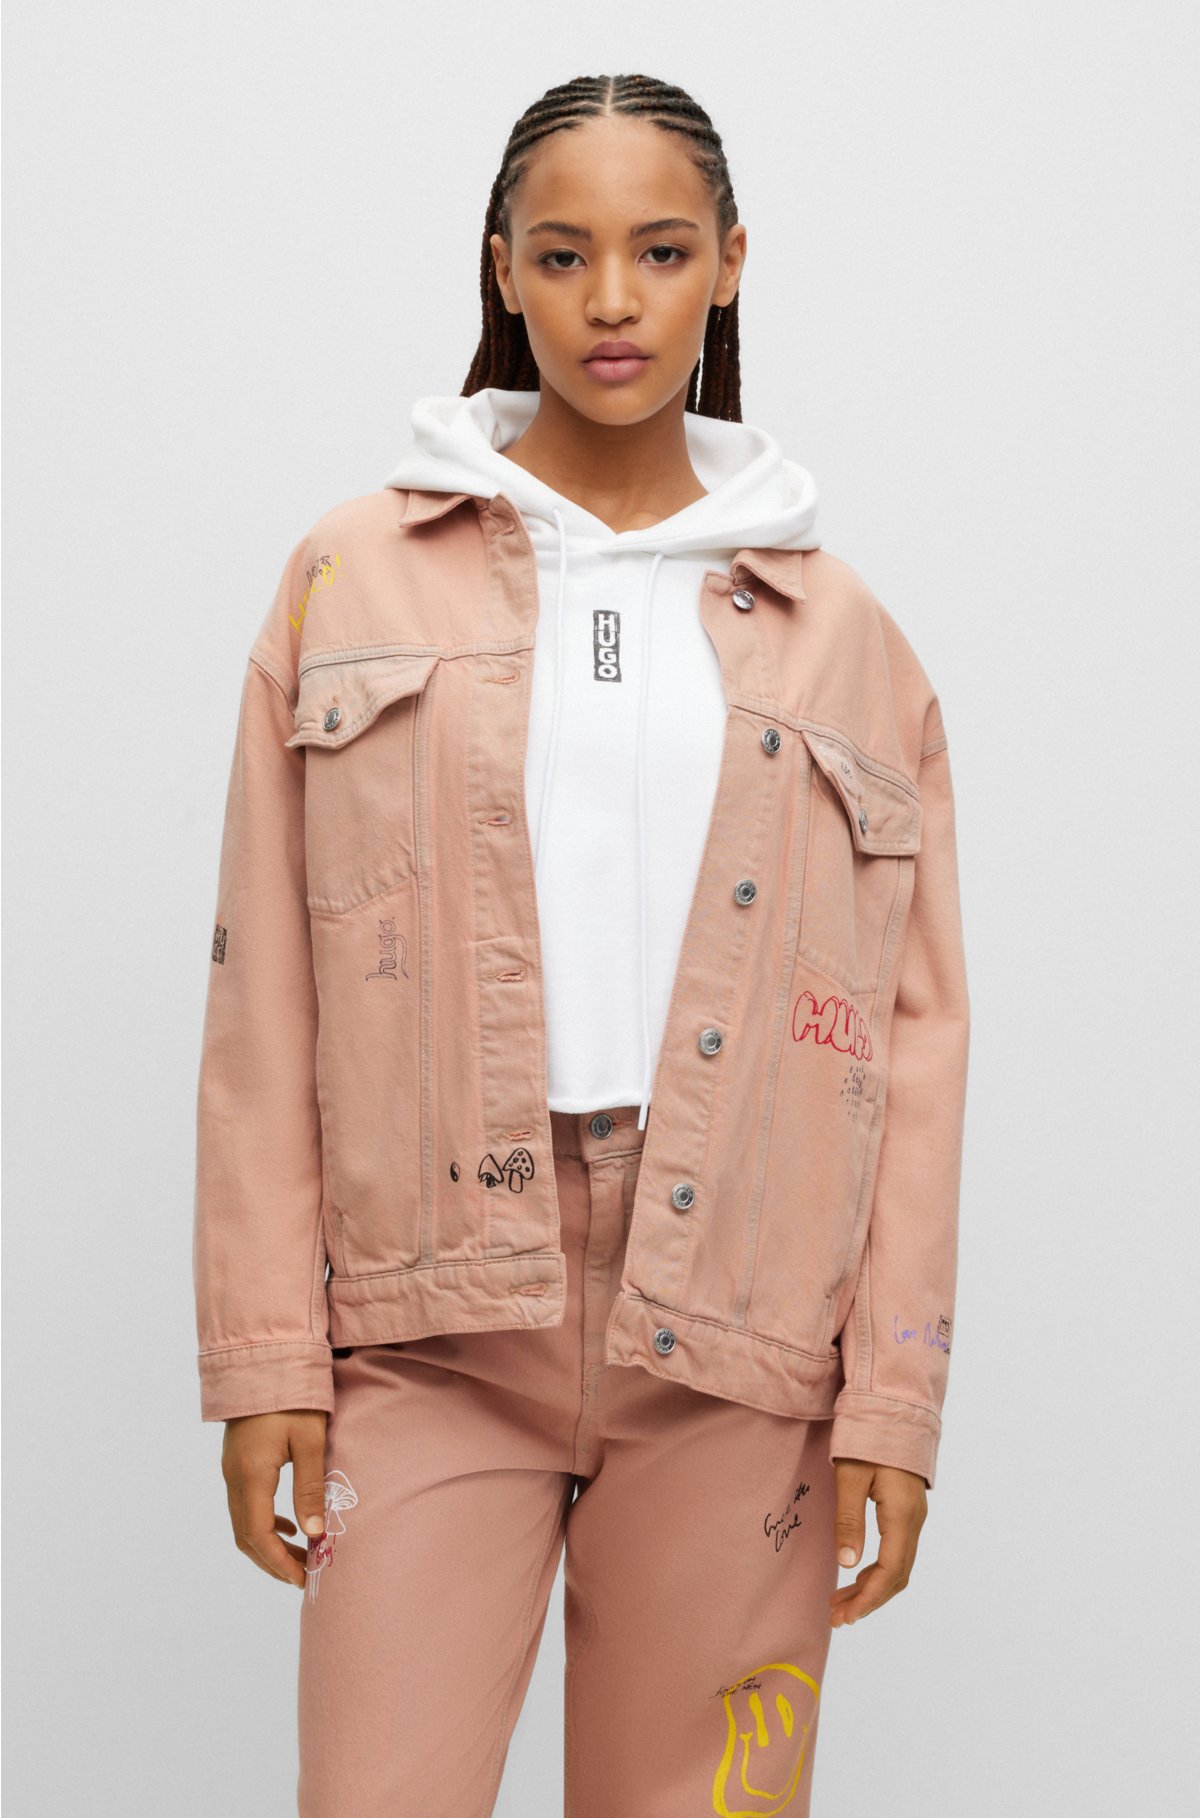 Shop Missguided Ski Wear up to 50% Off